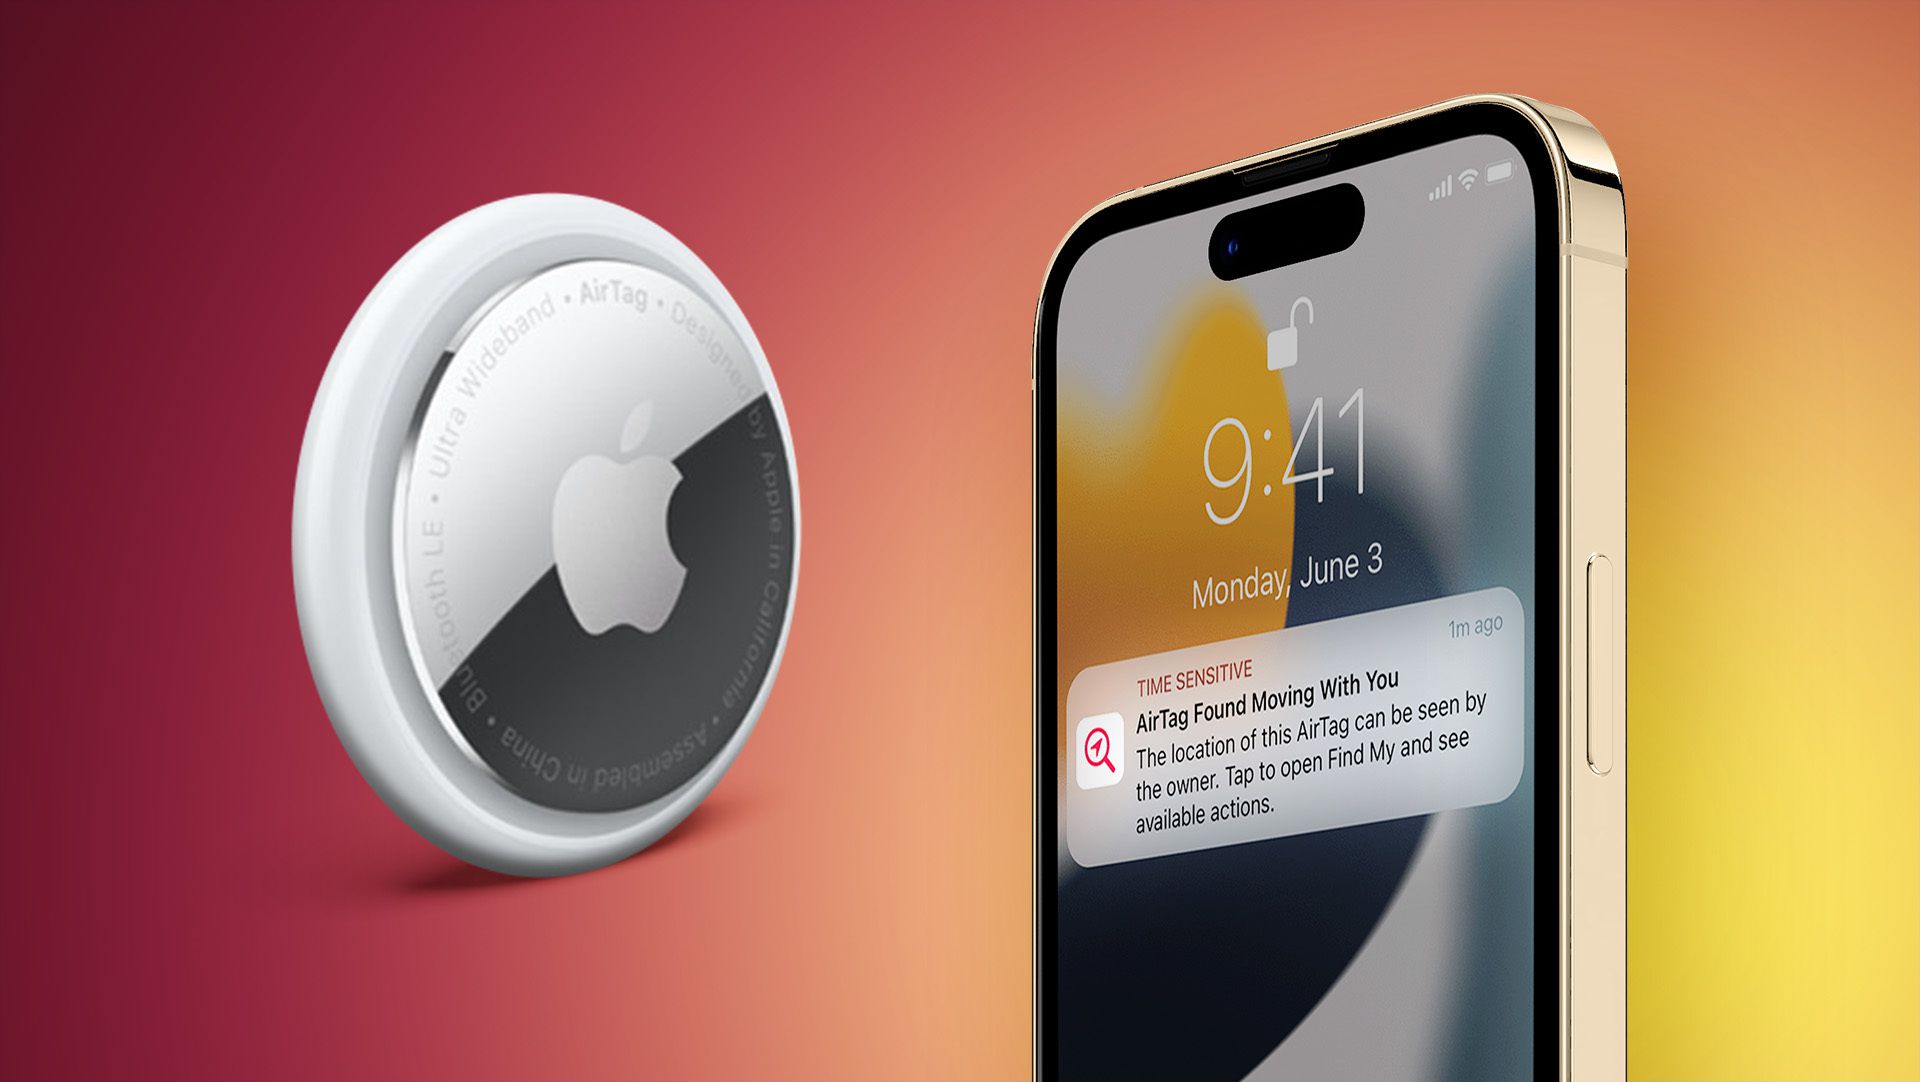 Samsung Released Apple AirTags Before Apple Did